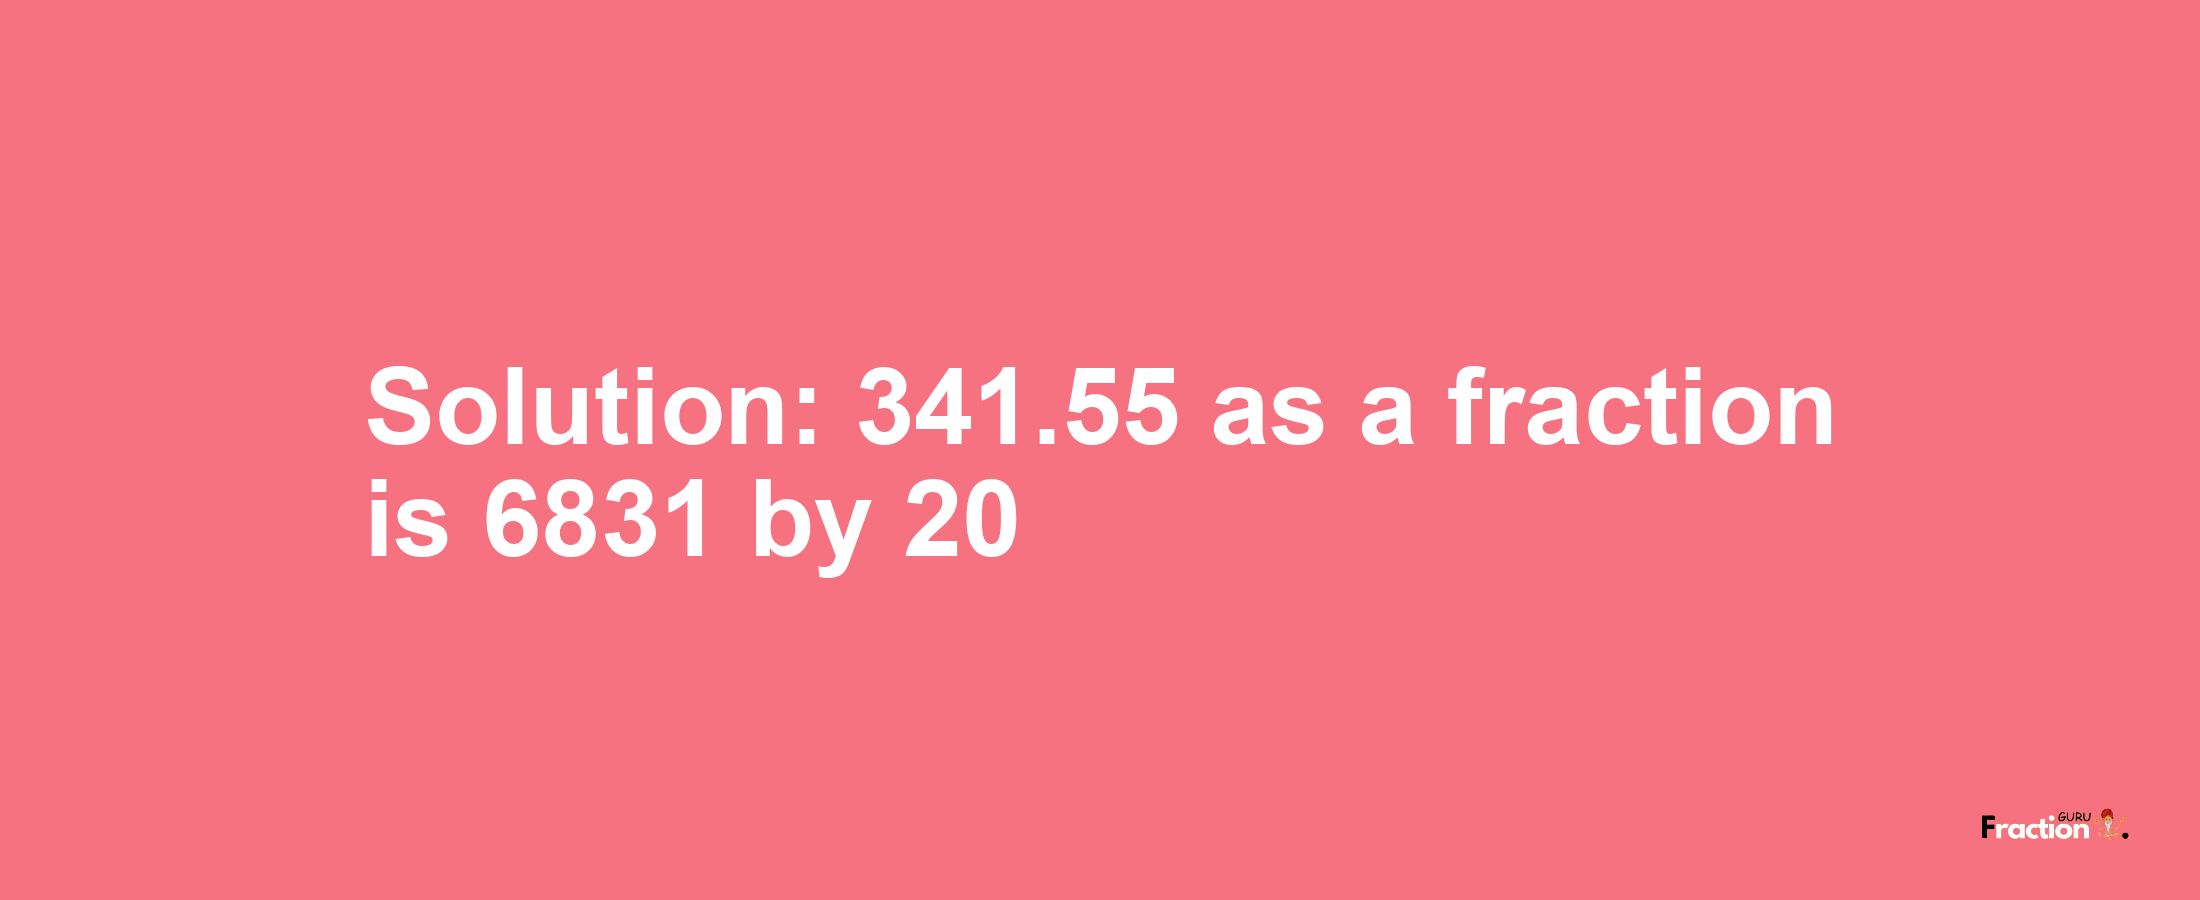 Solution:341.55 as a fraction is 6831/20